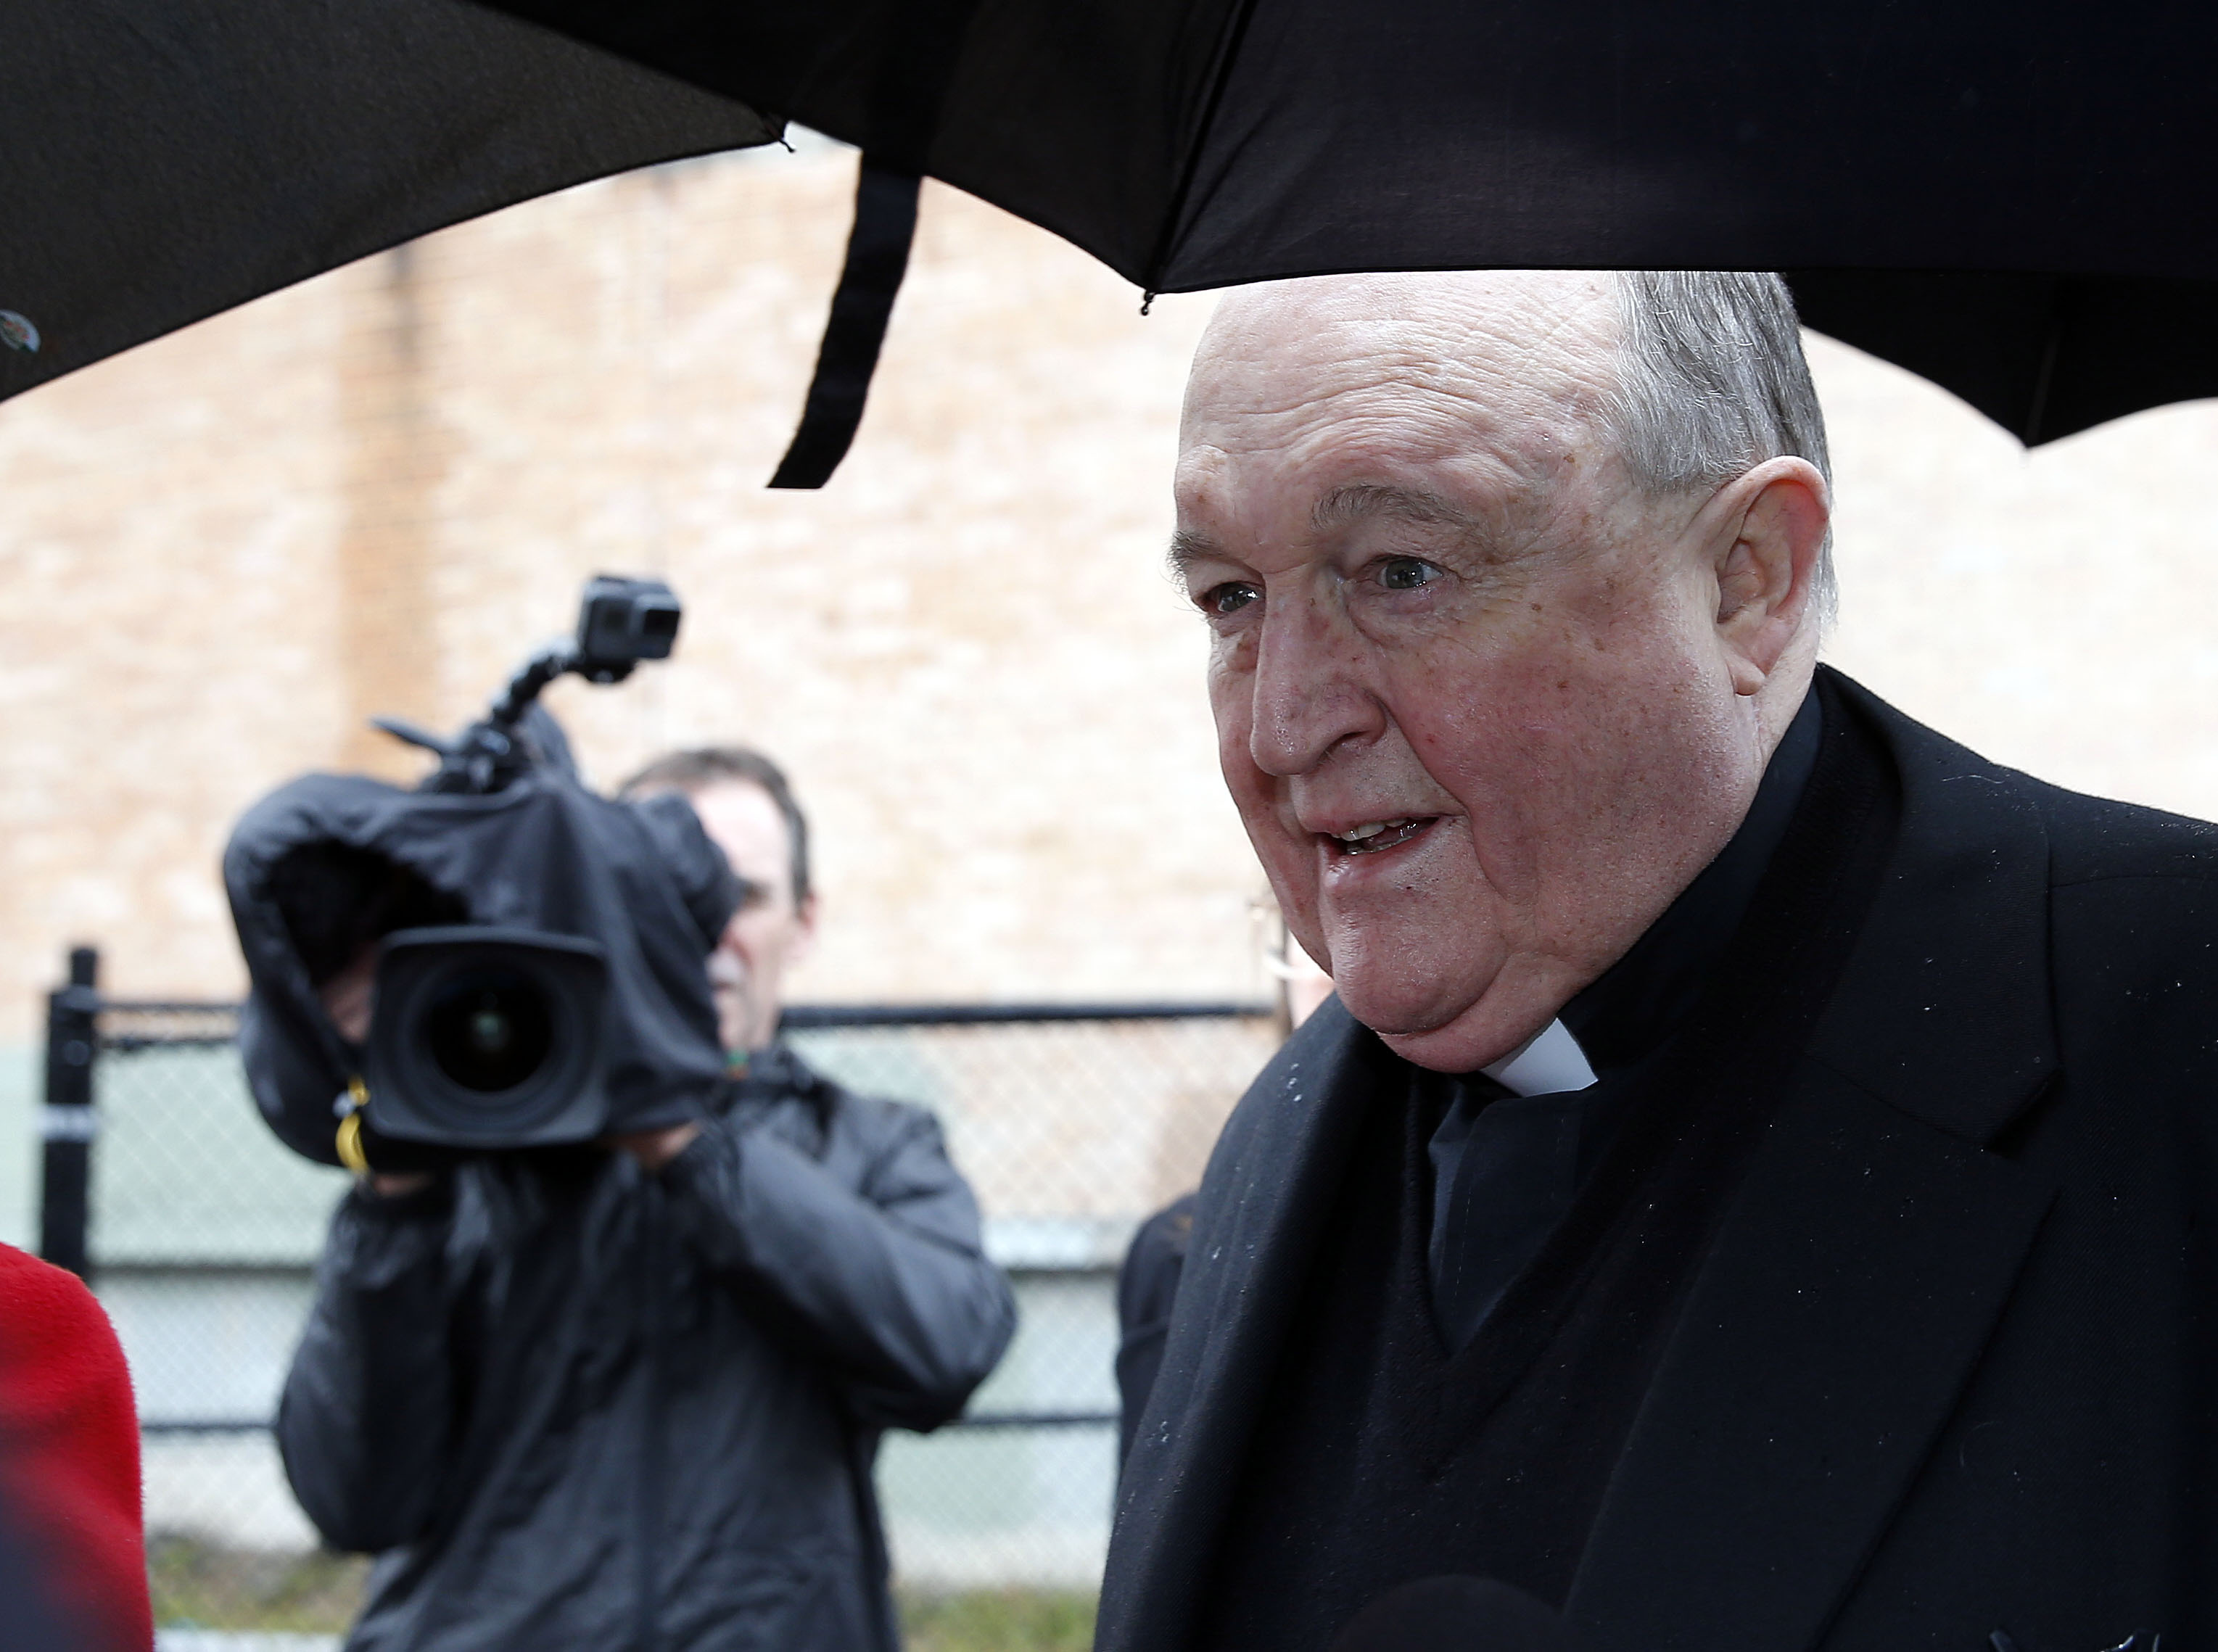 Archbishop Wilson sentenced to 12 months’ detention on charge of concealing child sexual abuse